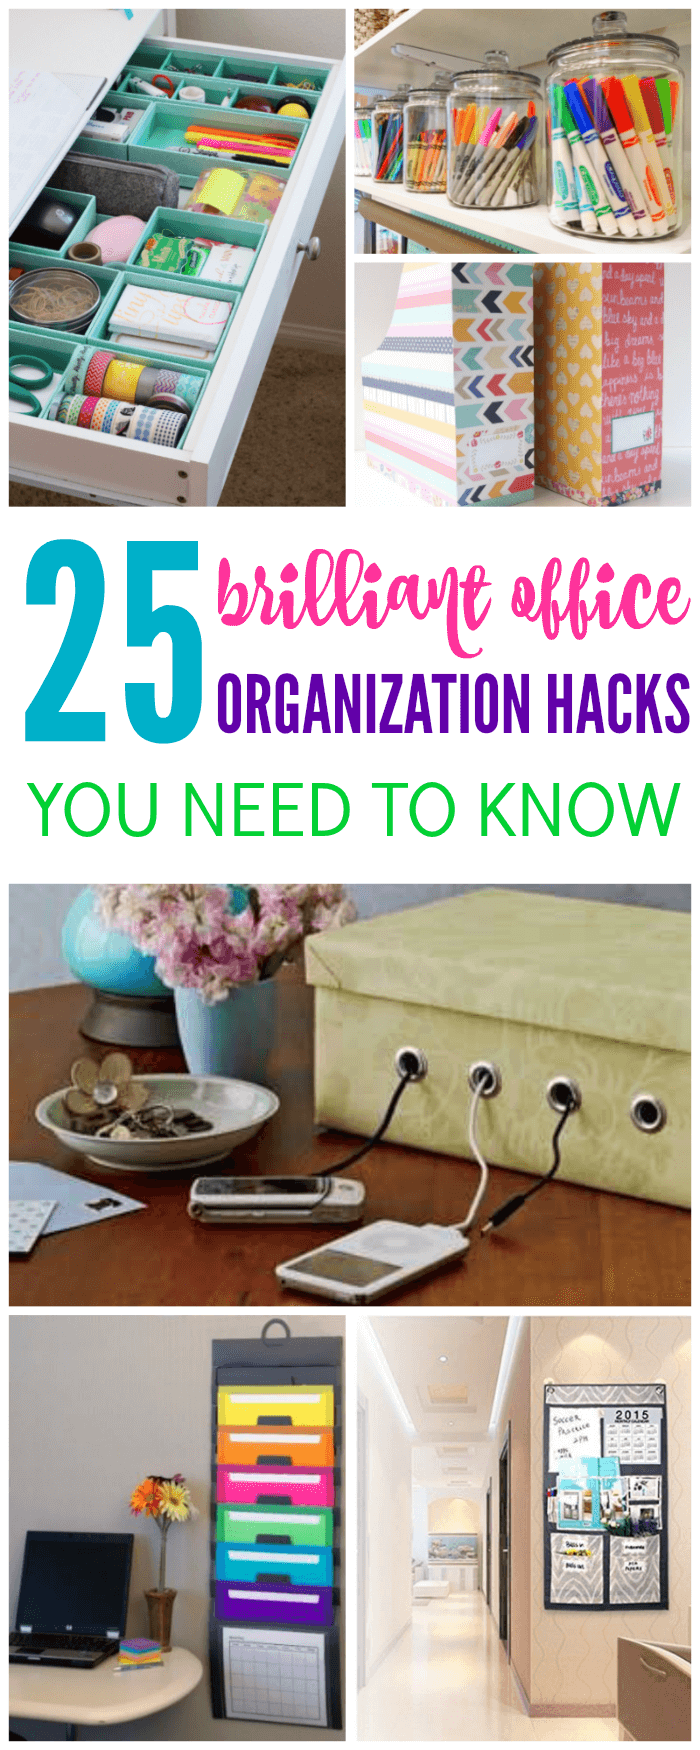 25 Brilliant Office Organization Hacks You Need to Know!